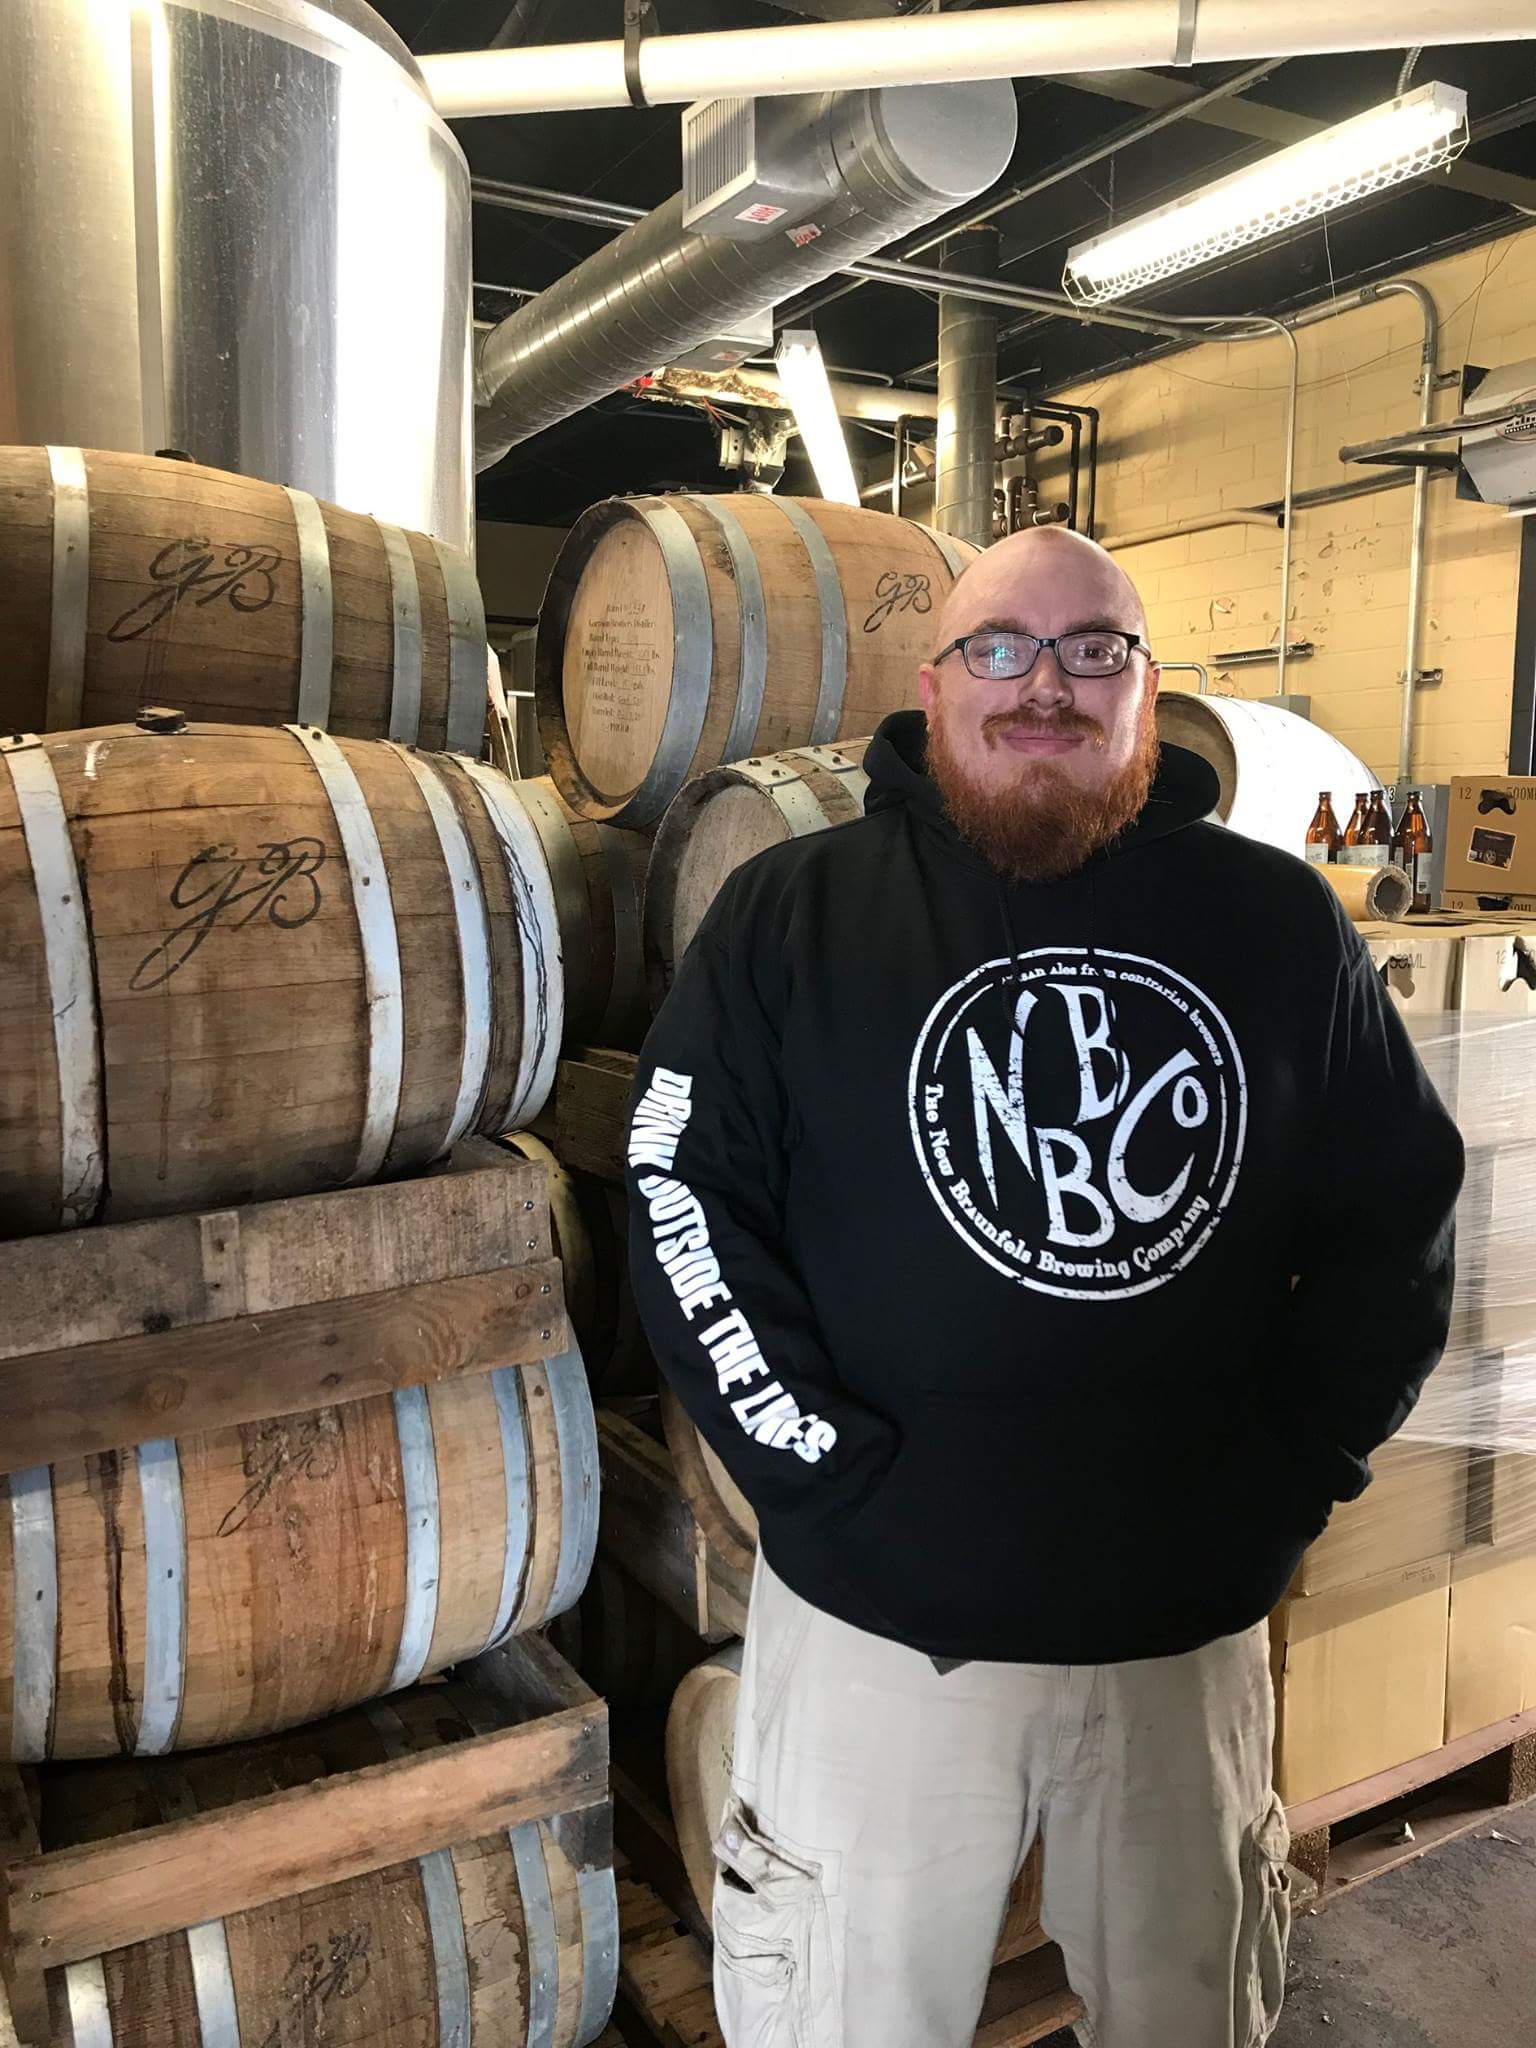 Nathan Rice, brewer at New Braunfels Brewing. (image courtesy of New Braunfels Brewing)